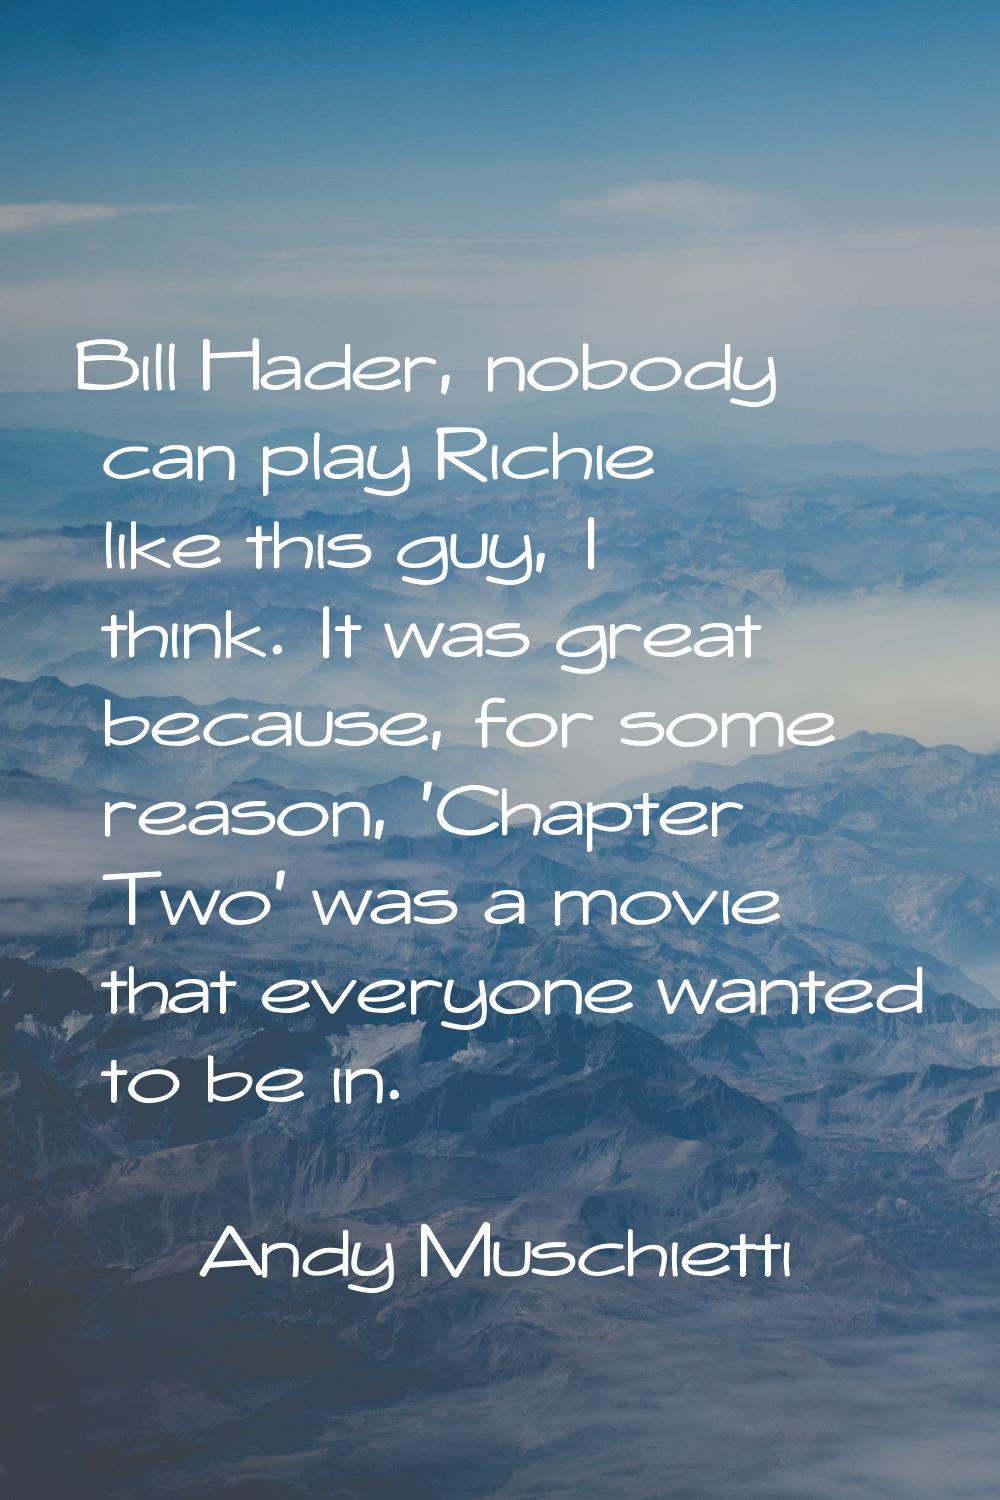 Bill Hader, nobody can play Richie like this guy, I think. It was great because, for some reason, '